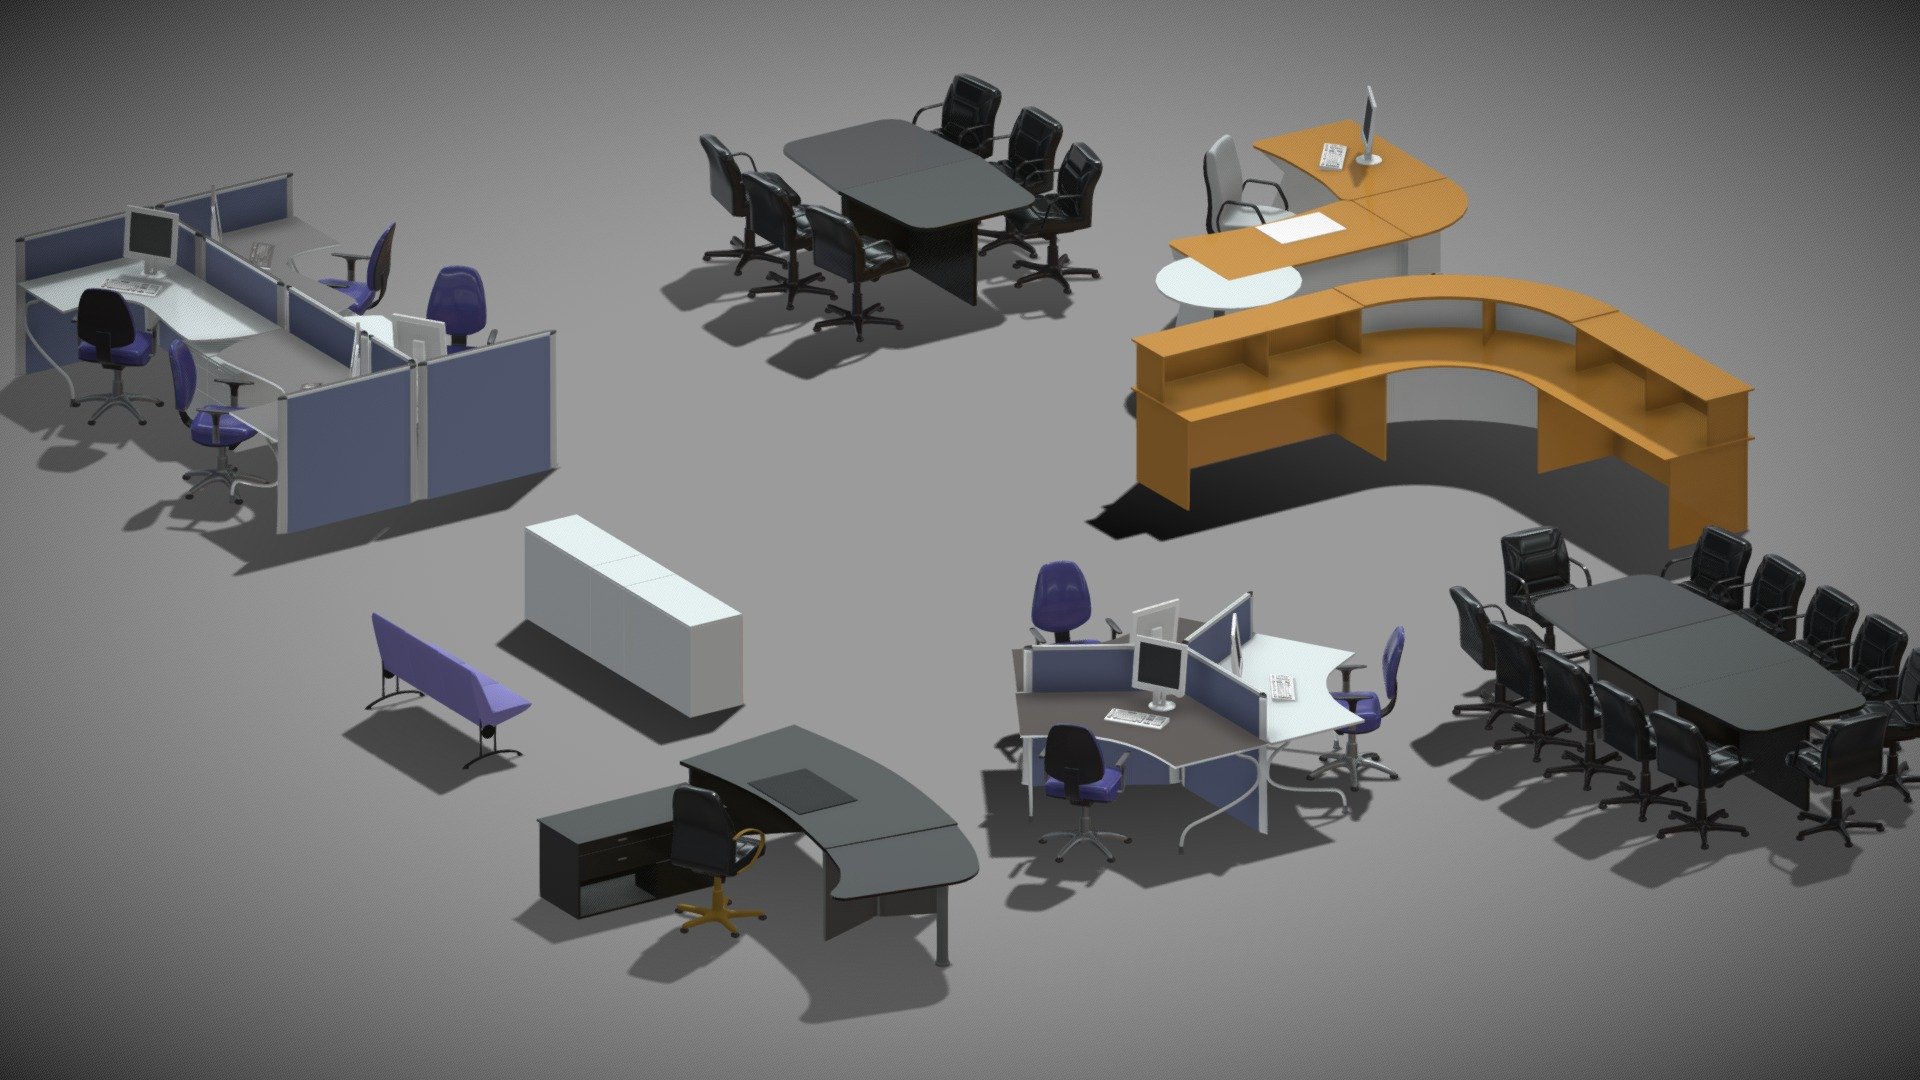 Fully detailed office furniture pack for 3d worlds.
Nine models
Max 4 file - office furniture vol 09 pack - Buy Royalty Free 3D model by Giimann 3d model